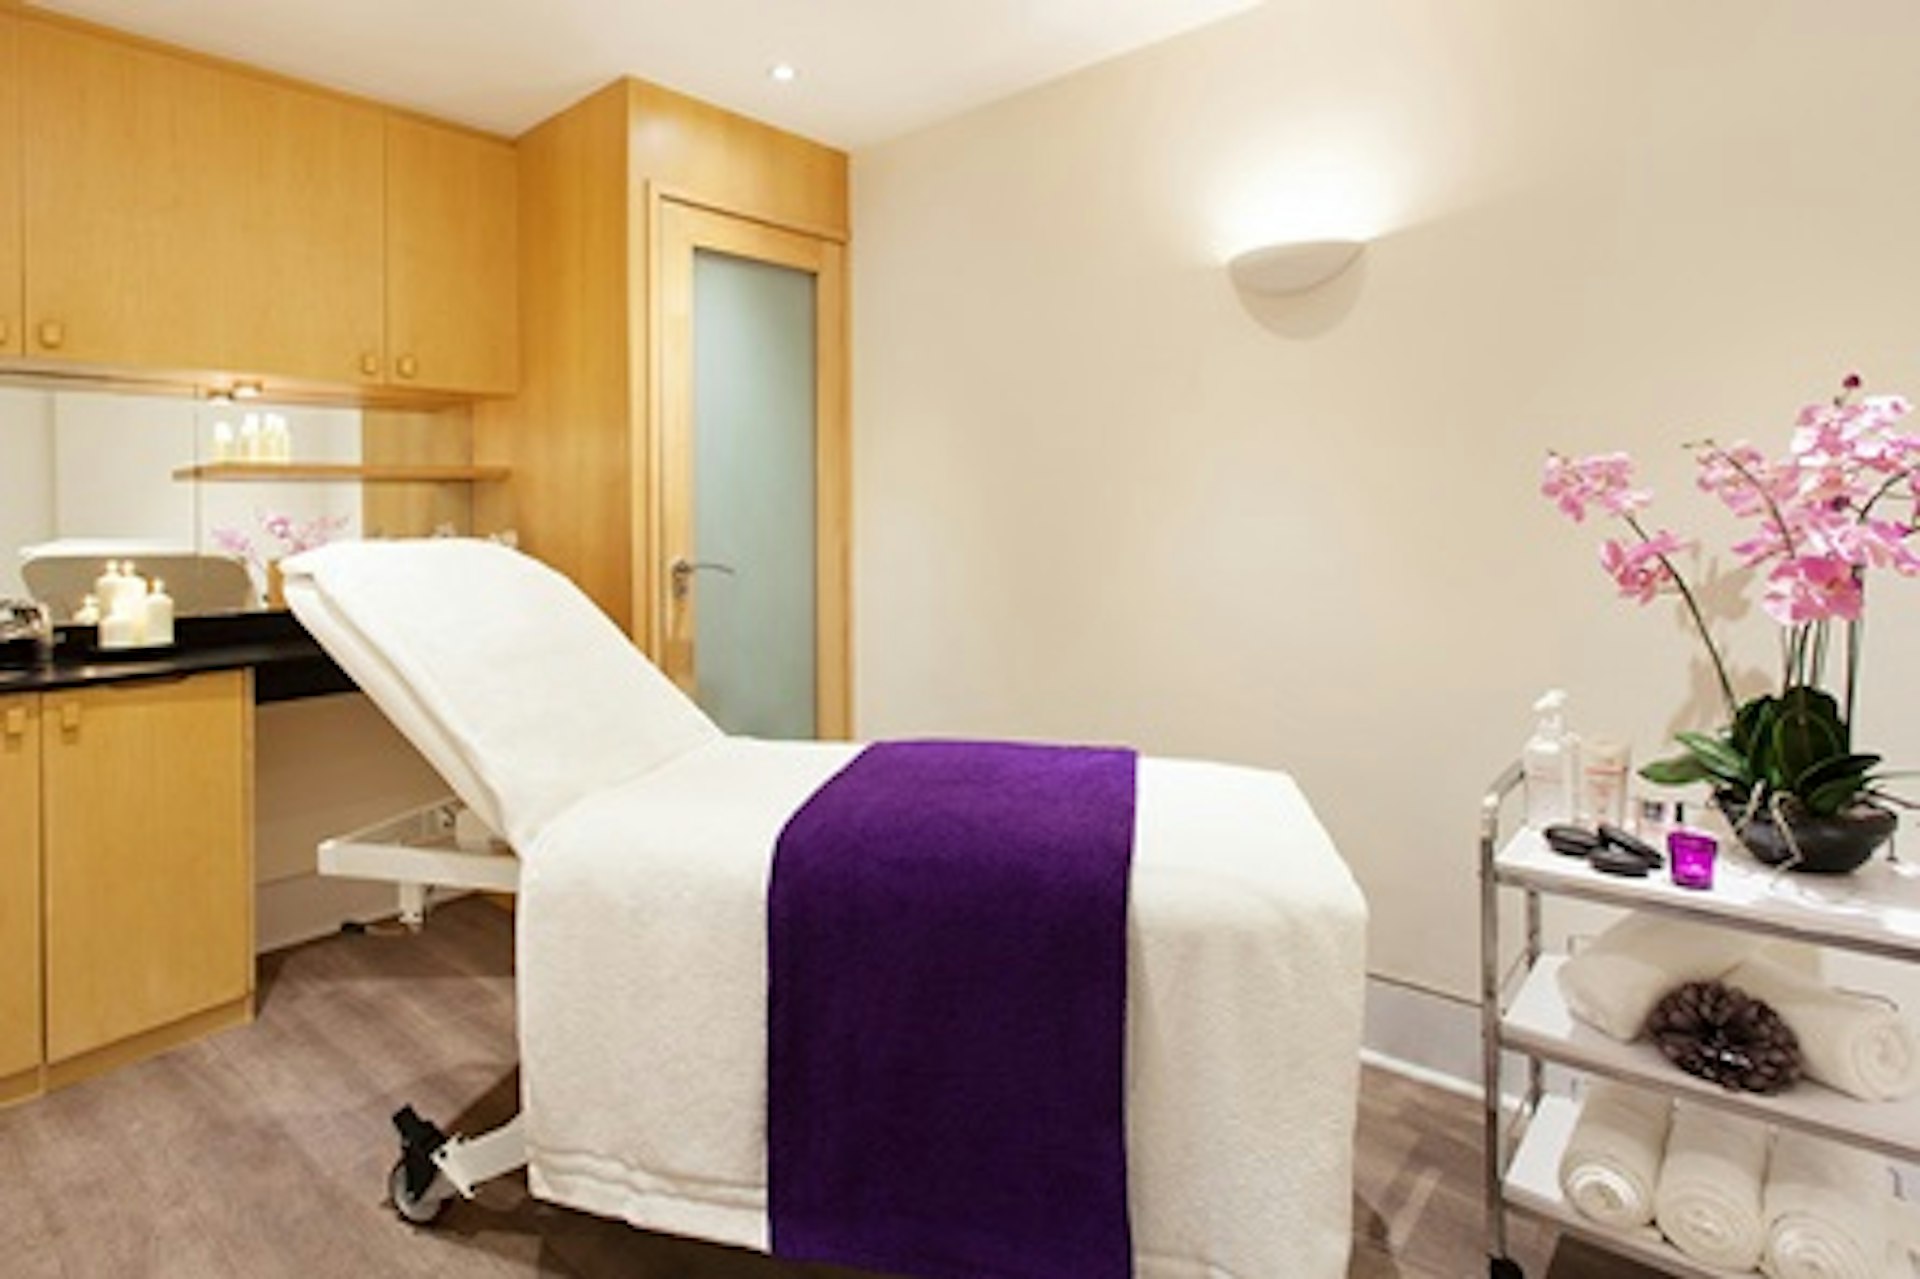 Relaxation Day with Treatment and Afternoon Tea for Two at the Crowne Plaza, Marlow 4